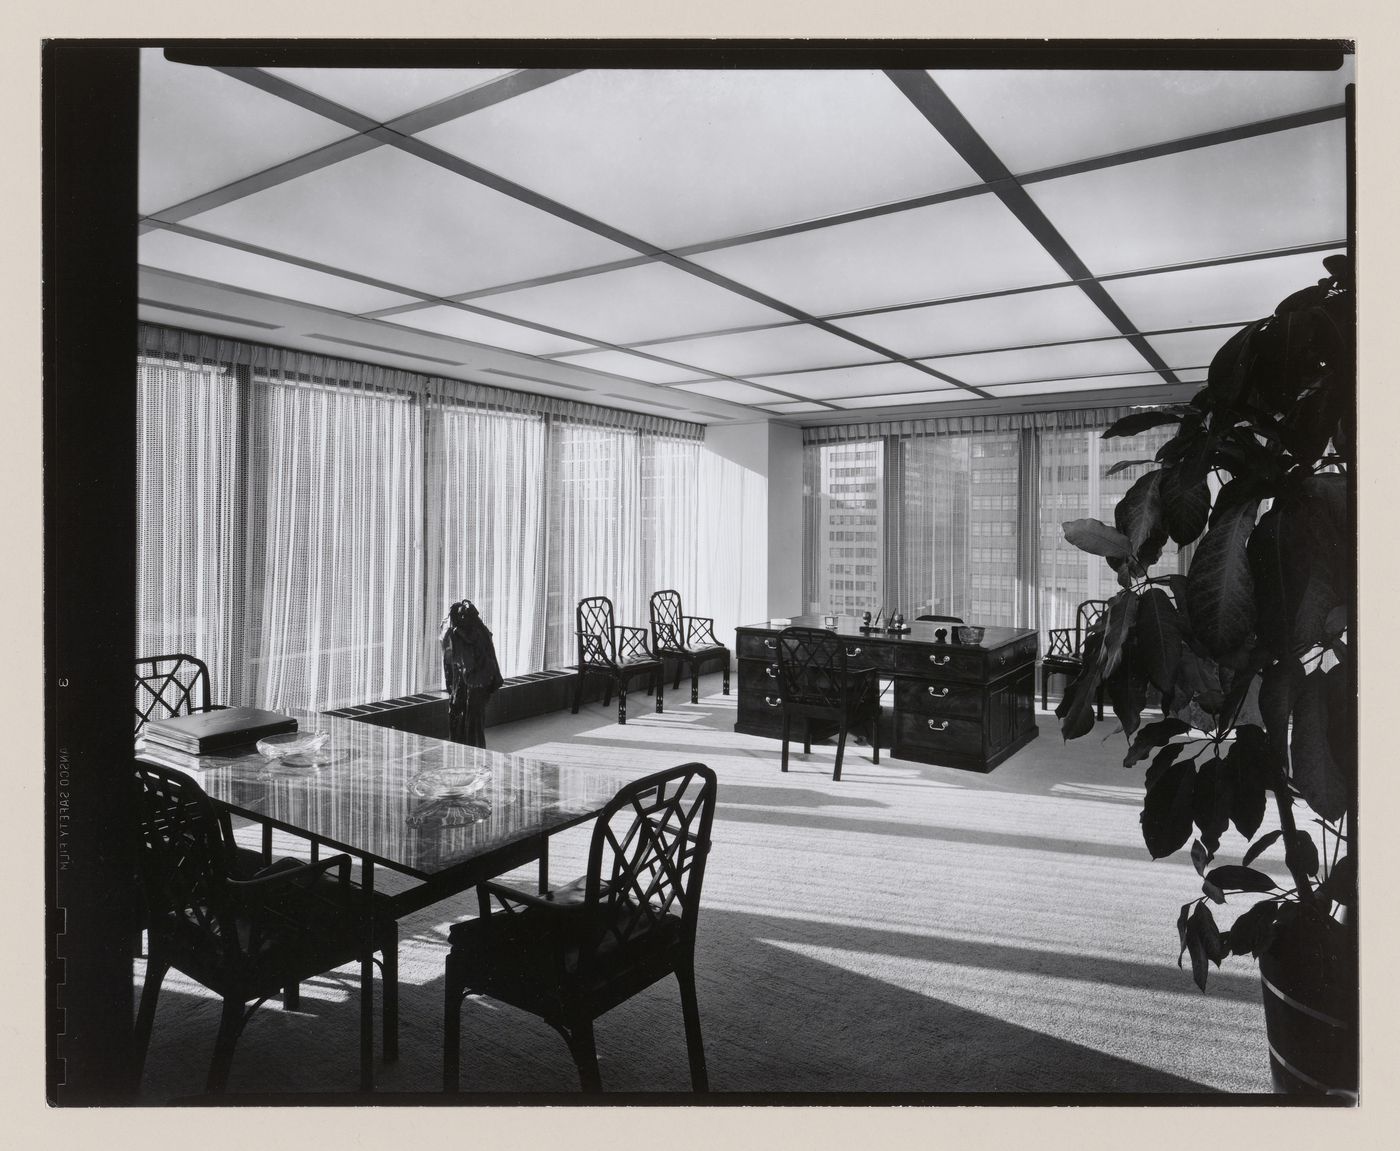 Interior view of a furnished office in the Seagram Building showing the recessed light fixtures designed by Richard Kelly, New York City